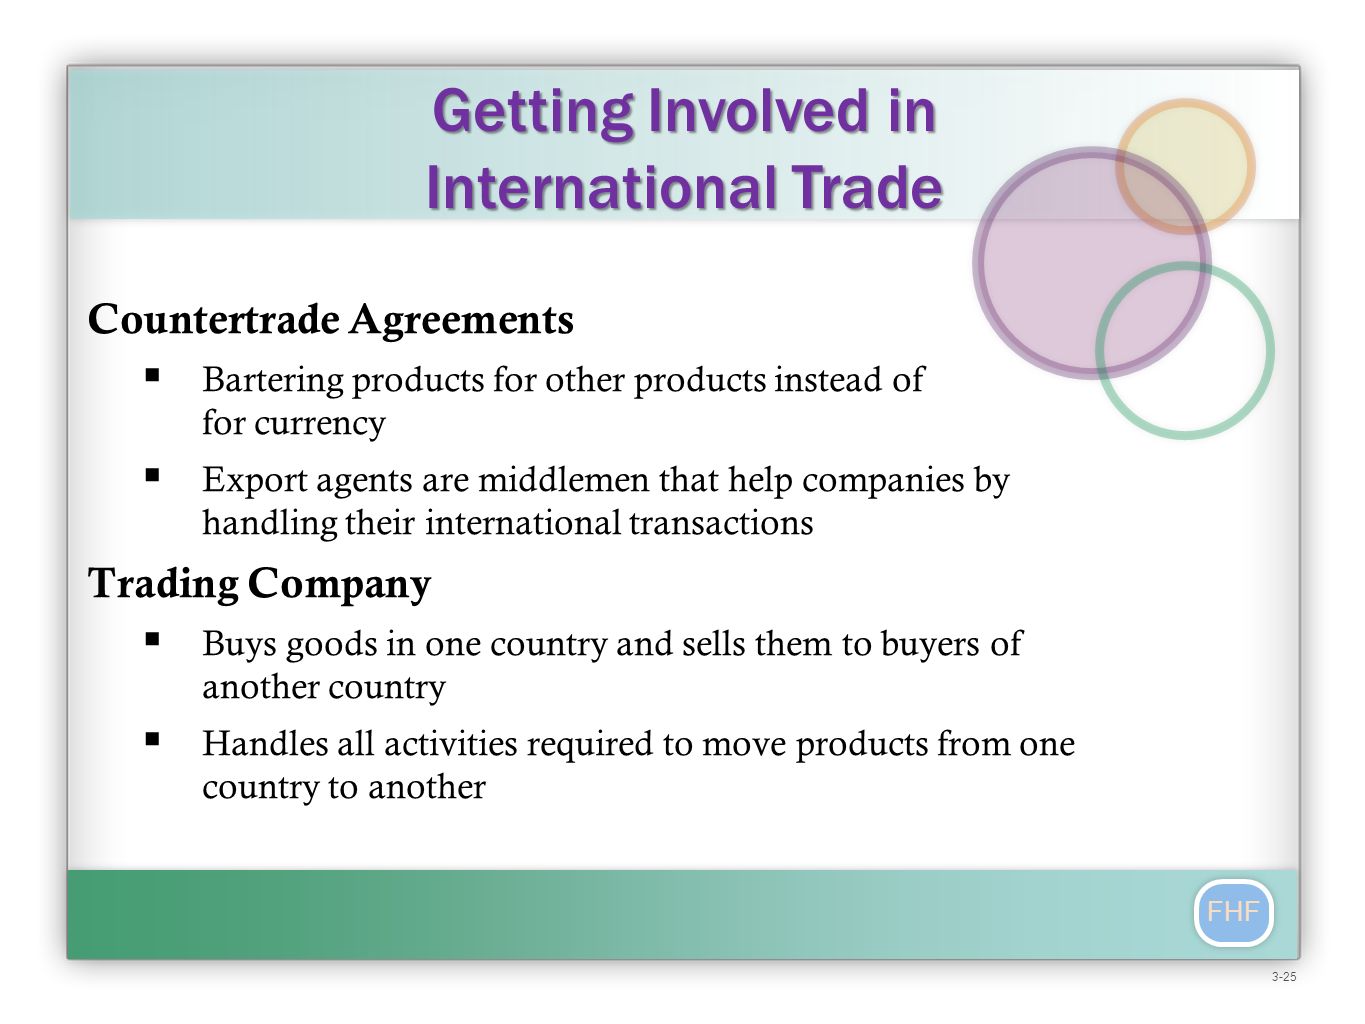 FHF Countertrade Agreements  Bartering products for other products instead of for currency  Export agents are middlemen that help companies by handling their international transactions Trading Company  Buys goods in one country and sells them to buyers of another country  Handles all activities required to move products from one country to another Getting Involved in International Trade 3-25